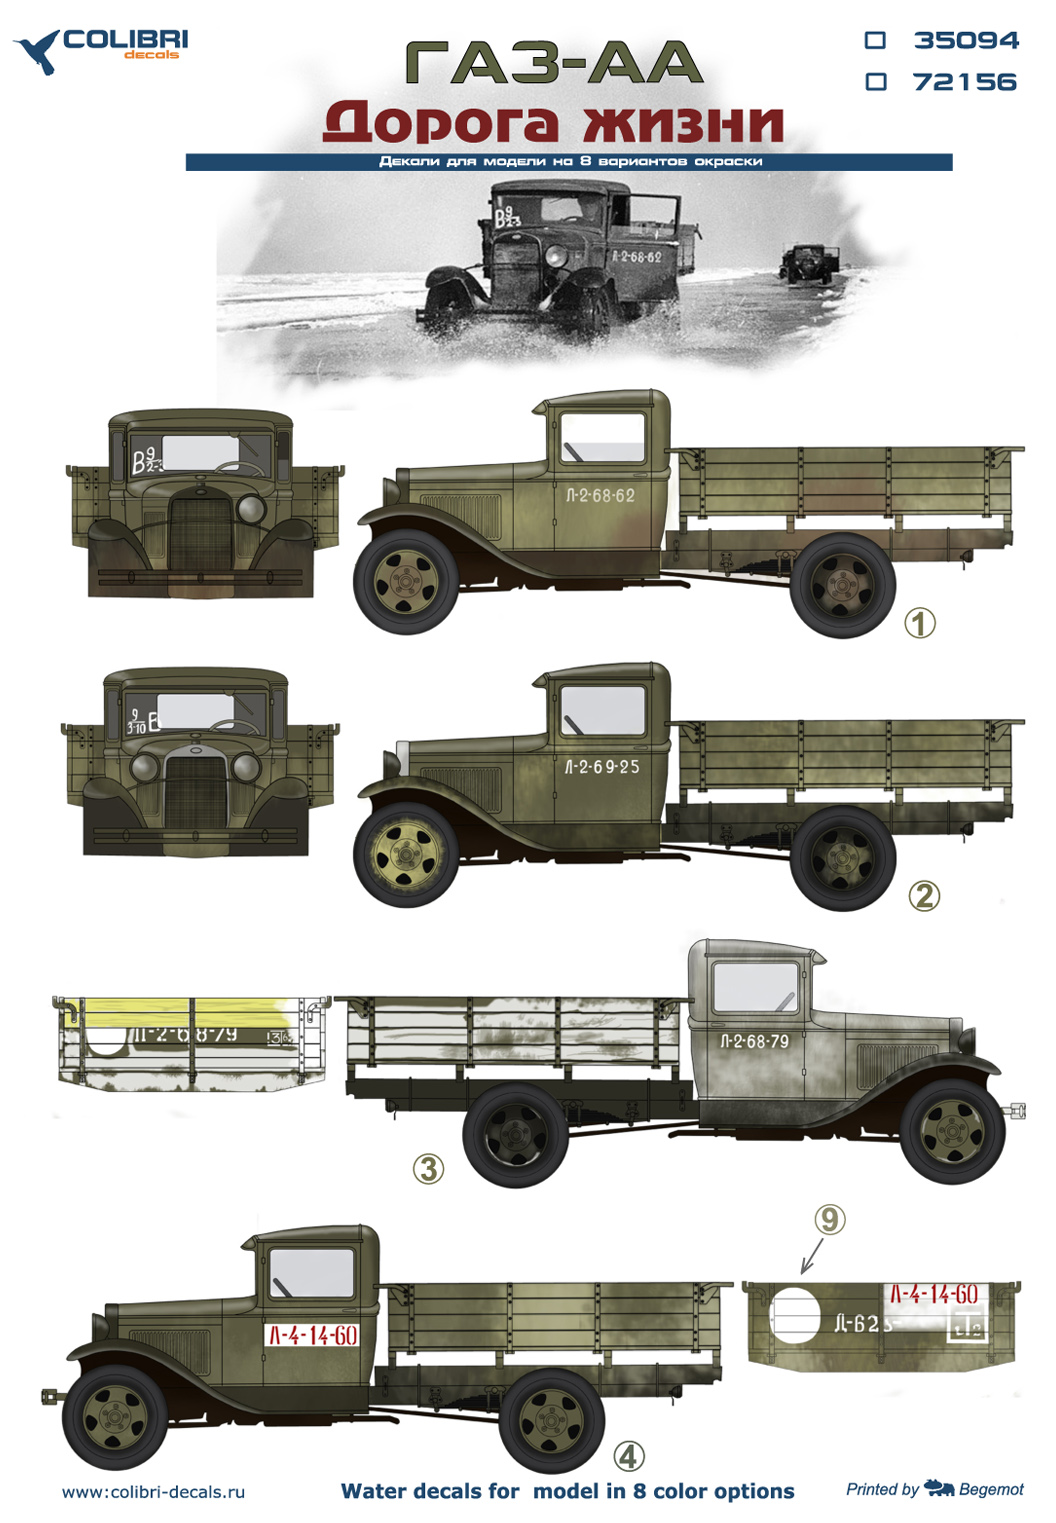 Decal 1/72 GaZ-AA - The Road of Life (Colibri Decals)